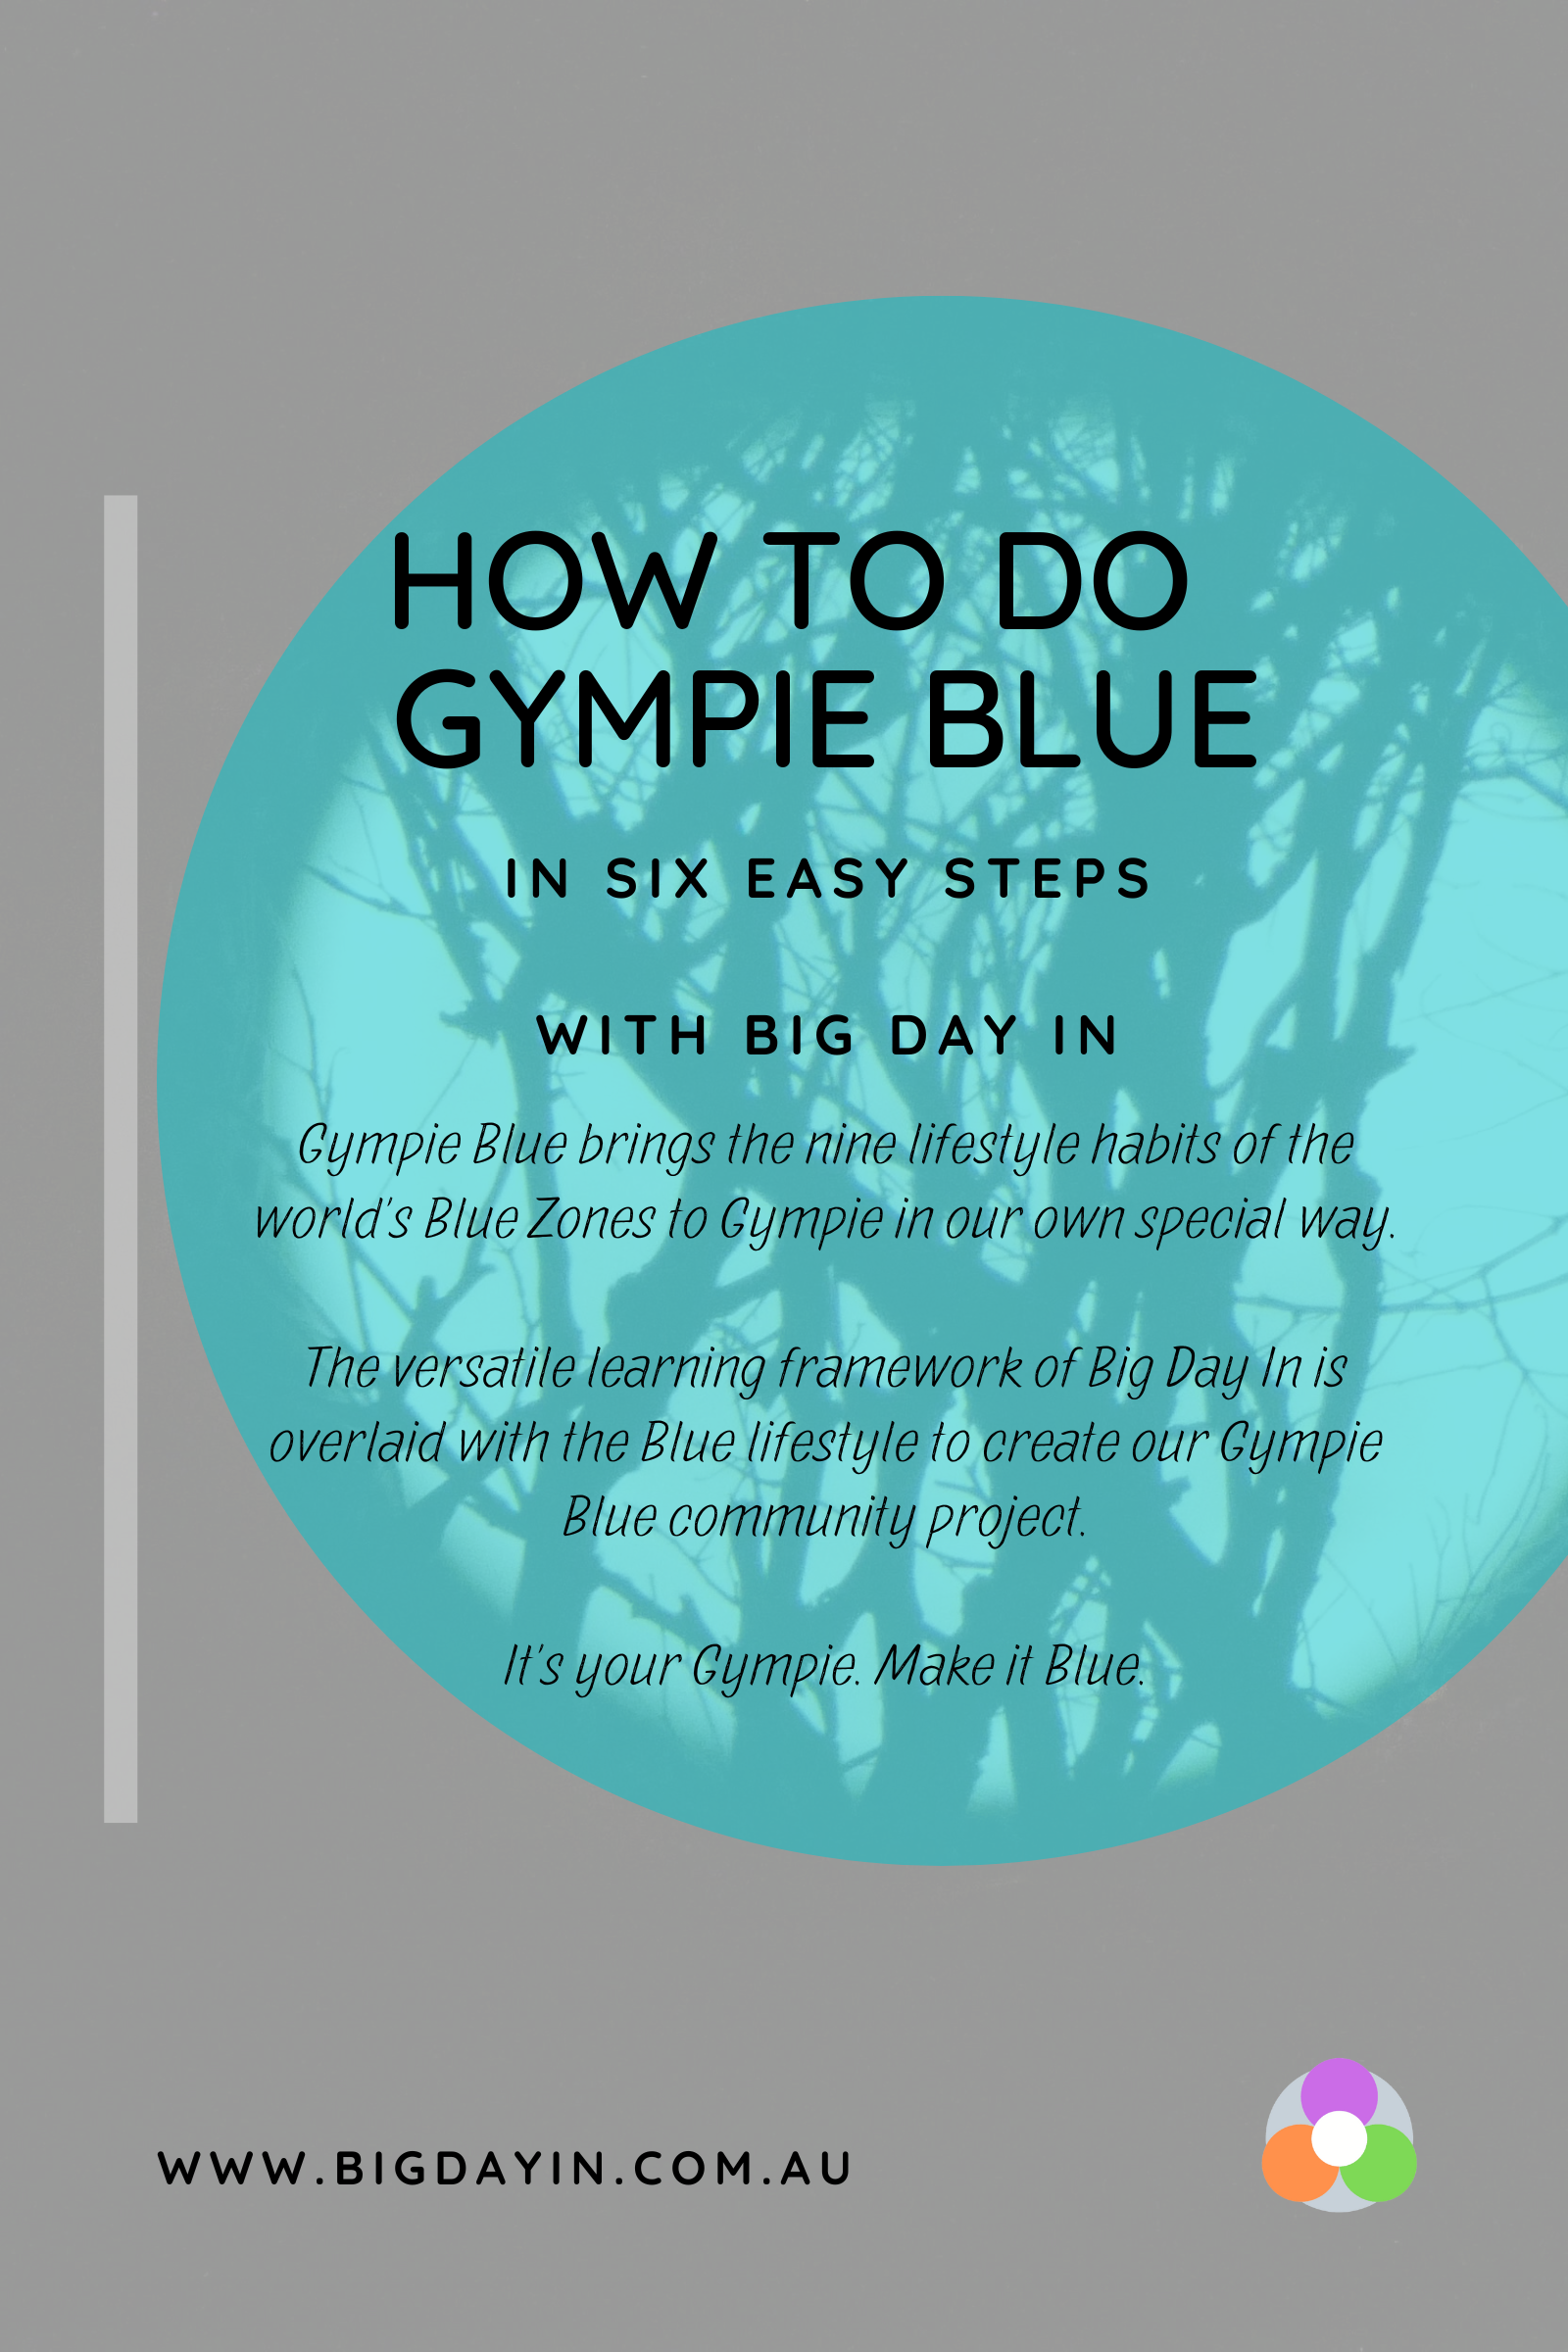 How to Gympie Blue